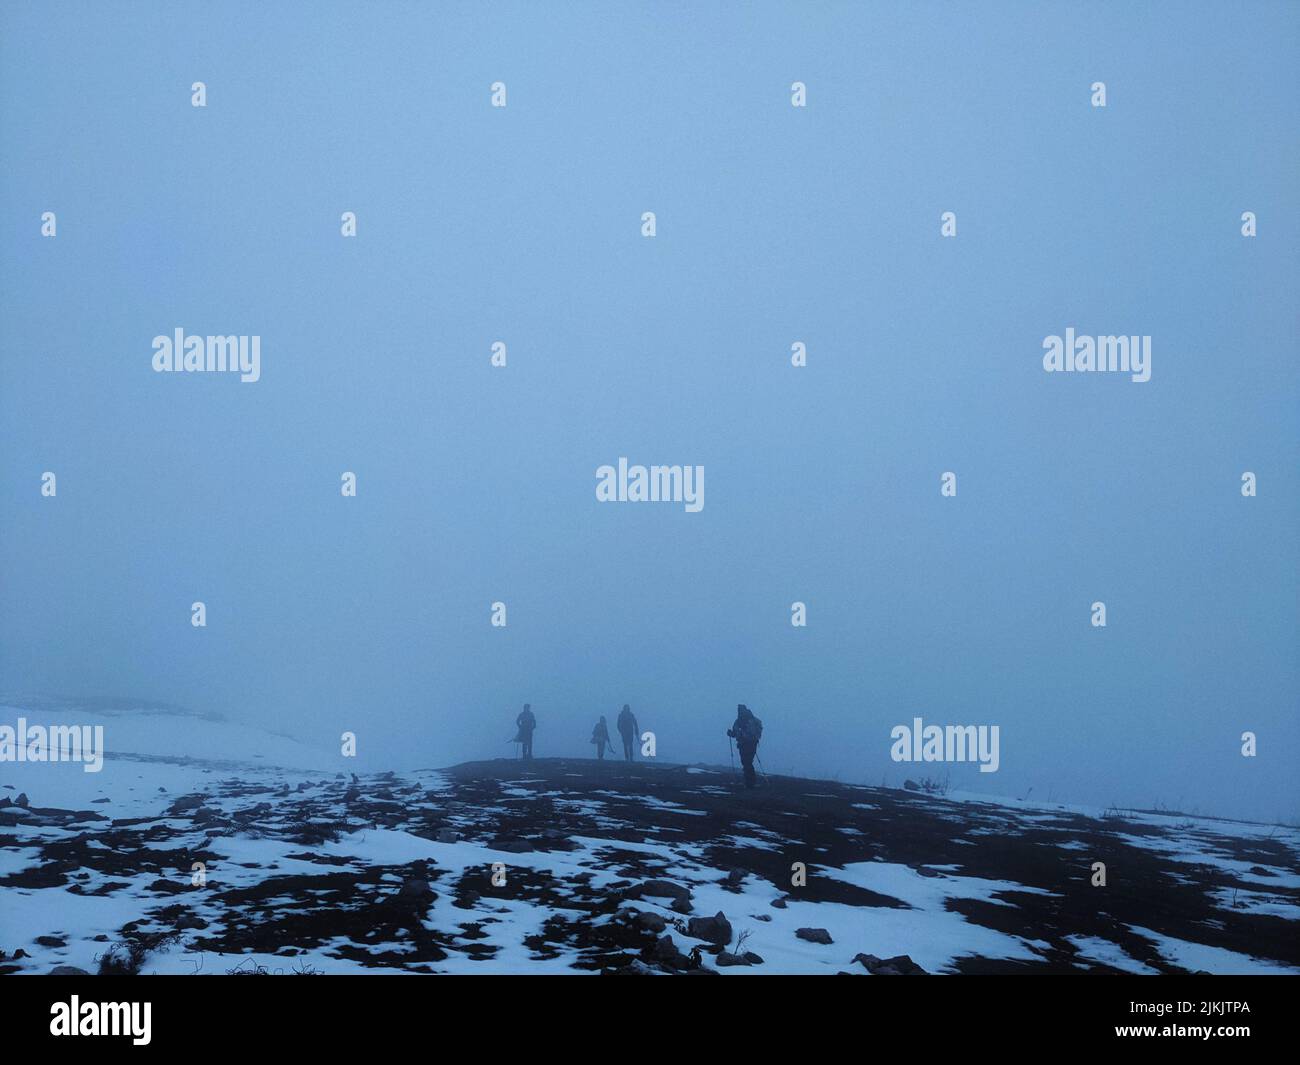 A group of people hiking in the mountains covered in snow on a foggy evening Stock Photo